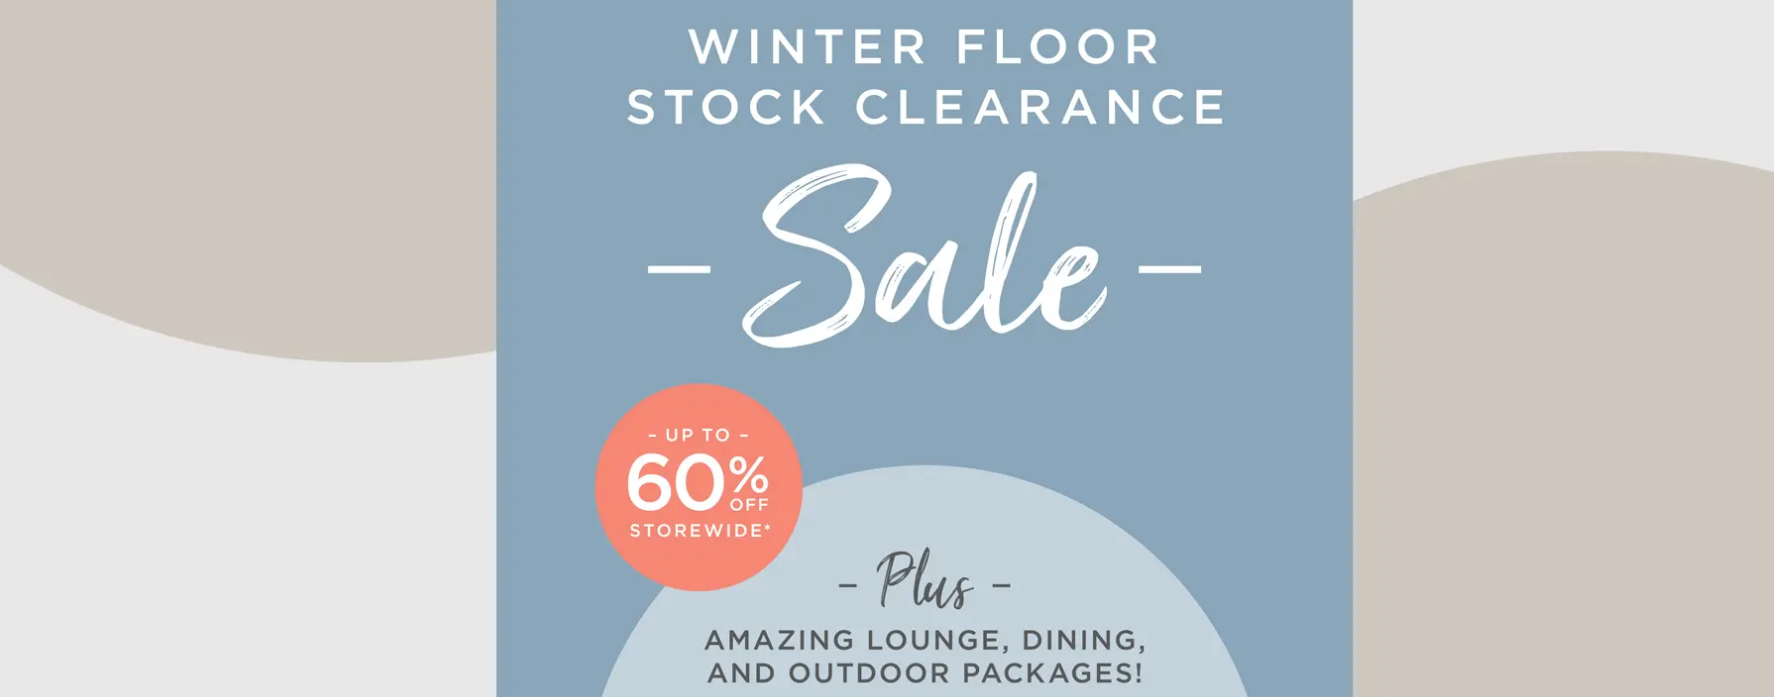 Up to 60% off storewide at our Winter Floor Stock Clearance Sale at Adriatic Furniture